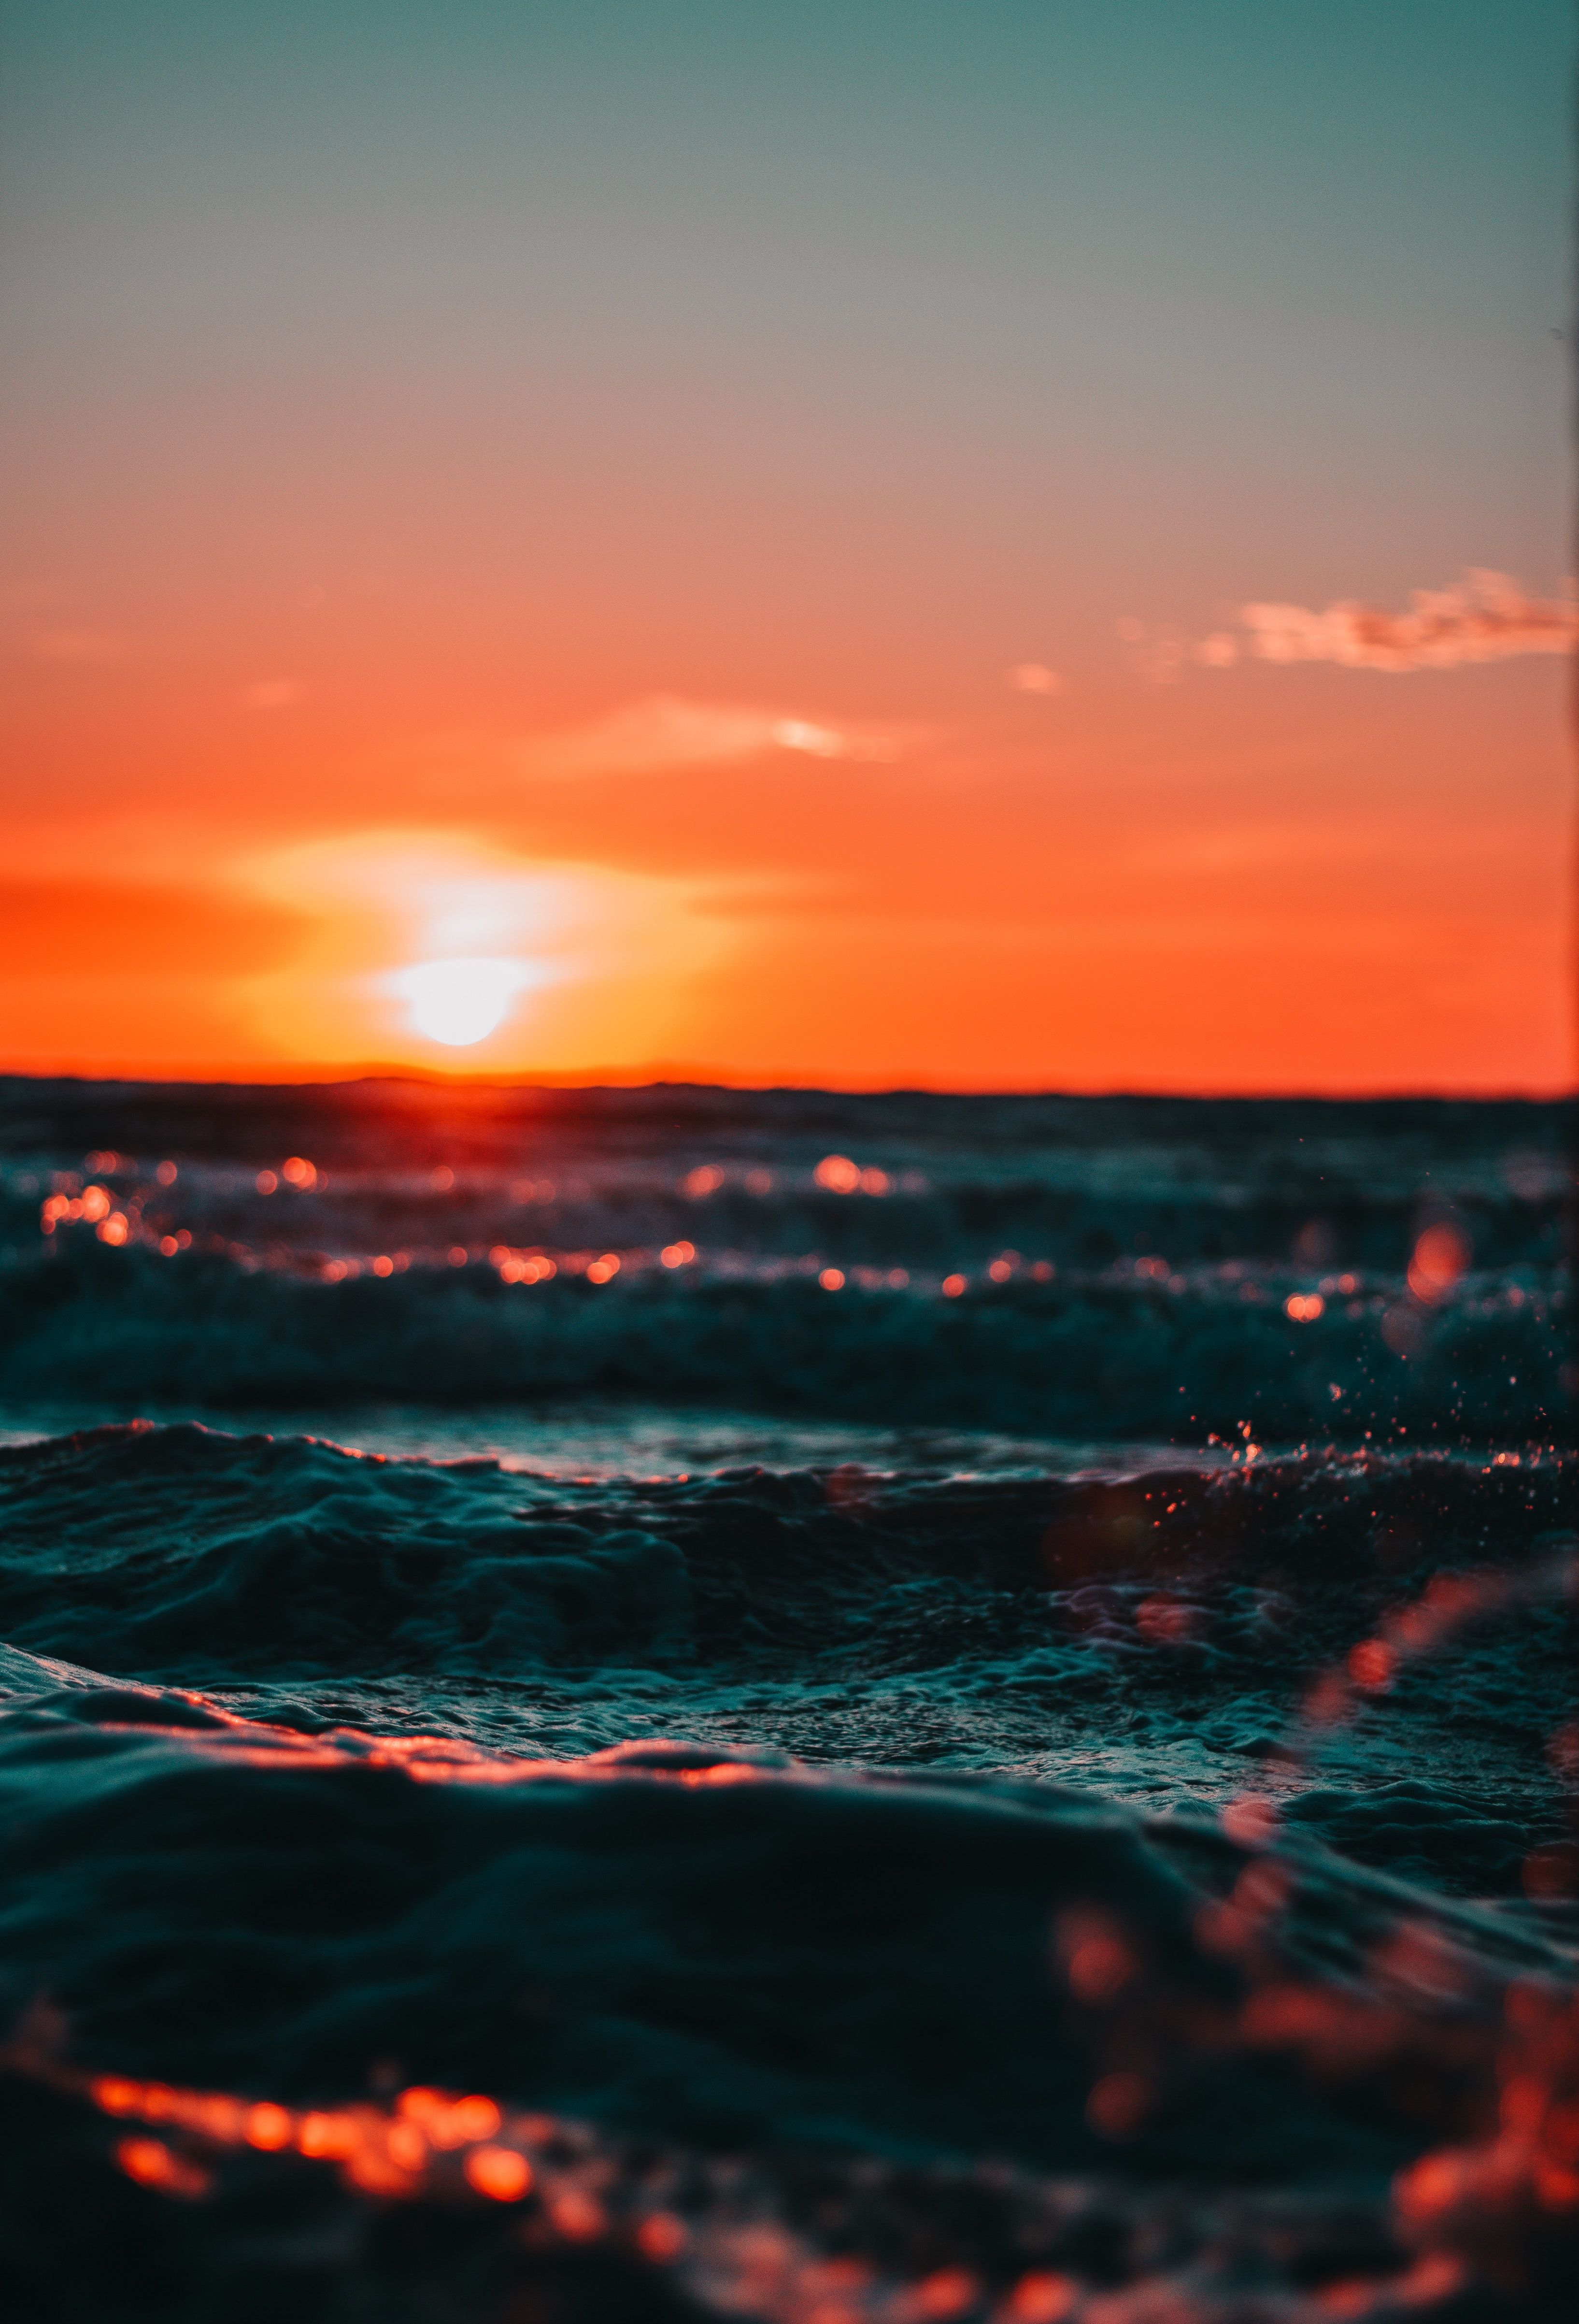 A sunset over the ocean with the sun setting behind the waves - Sunset, sun, ocean